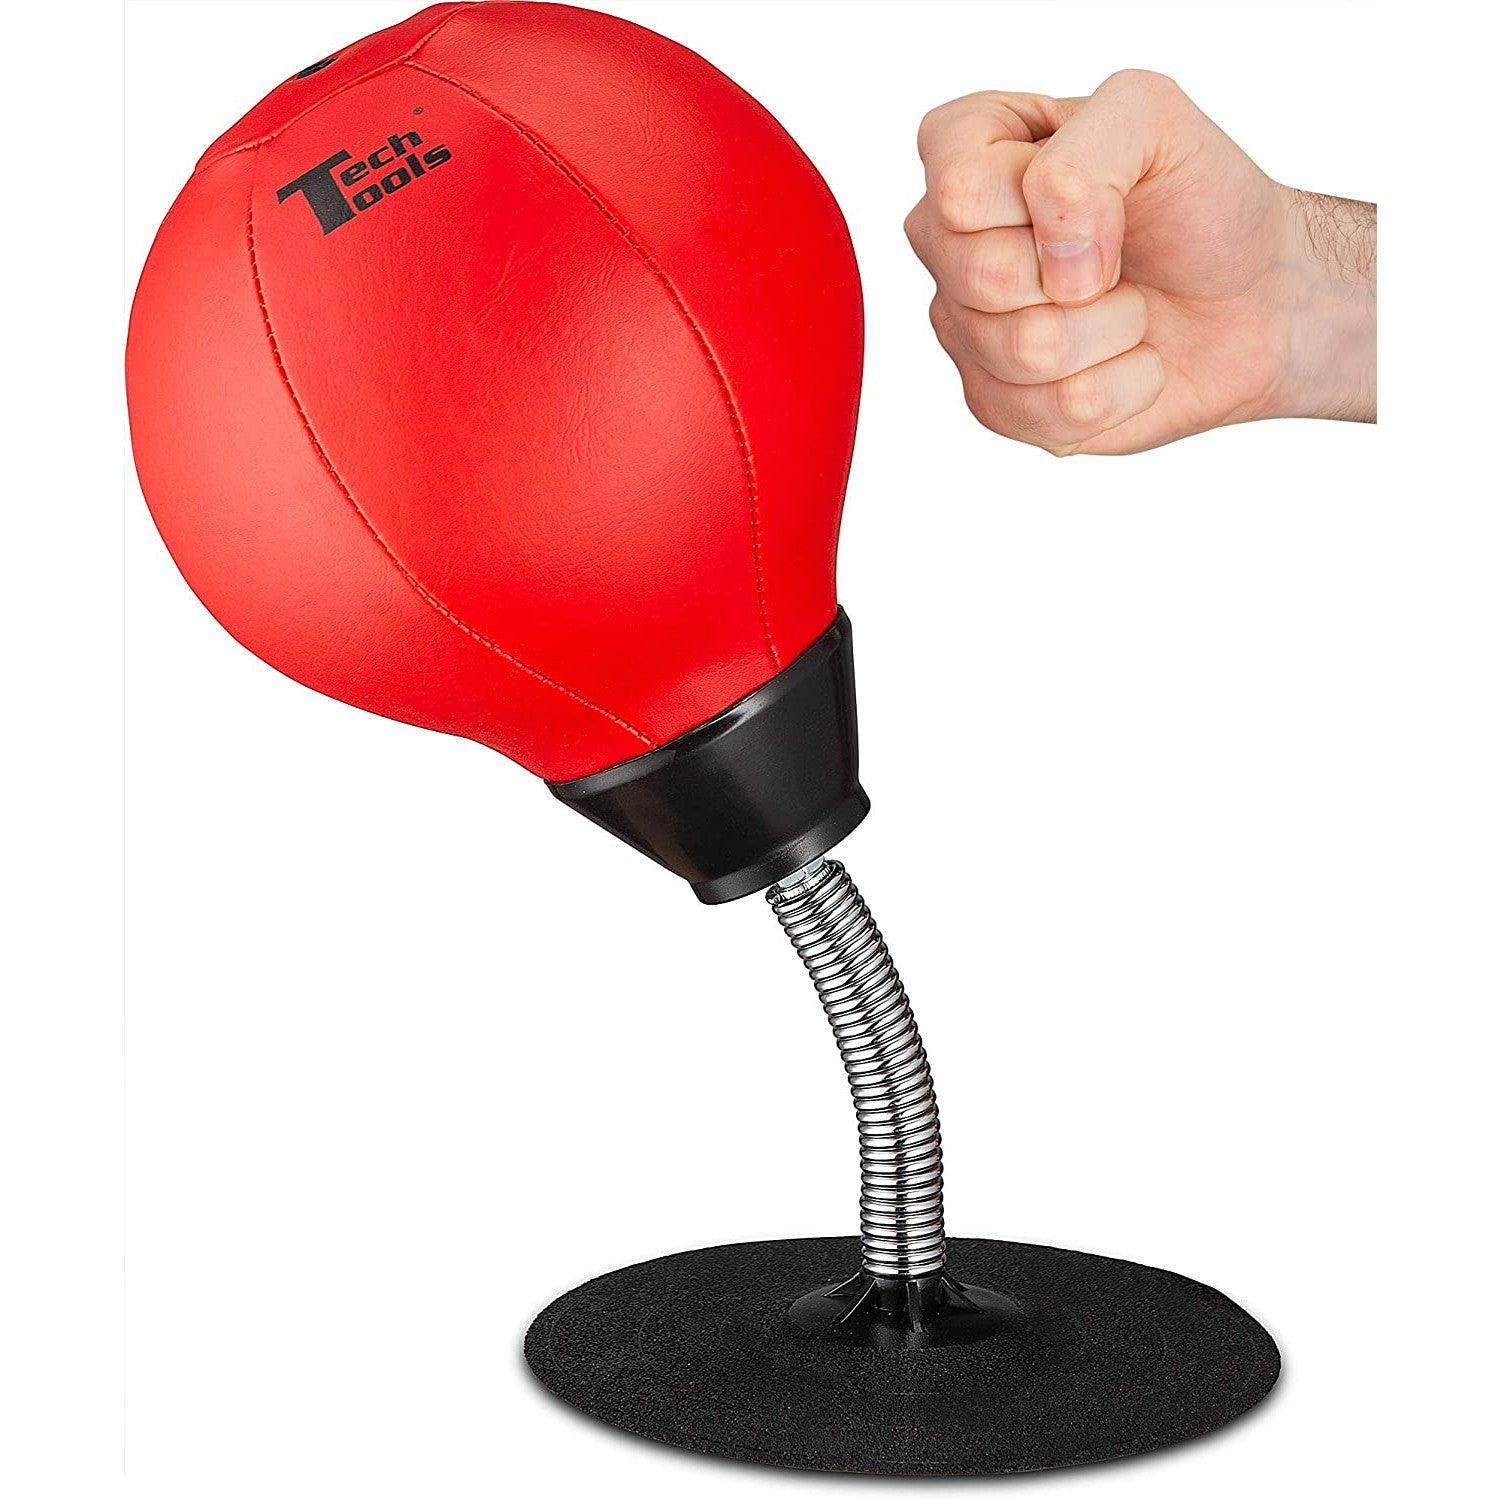 A fist is punching a desktop punching bag.